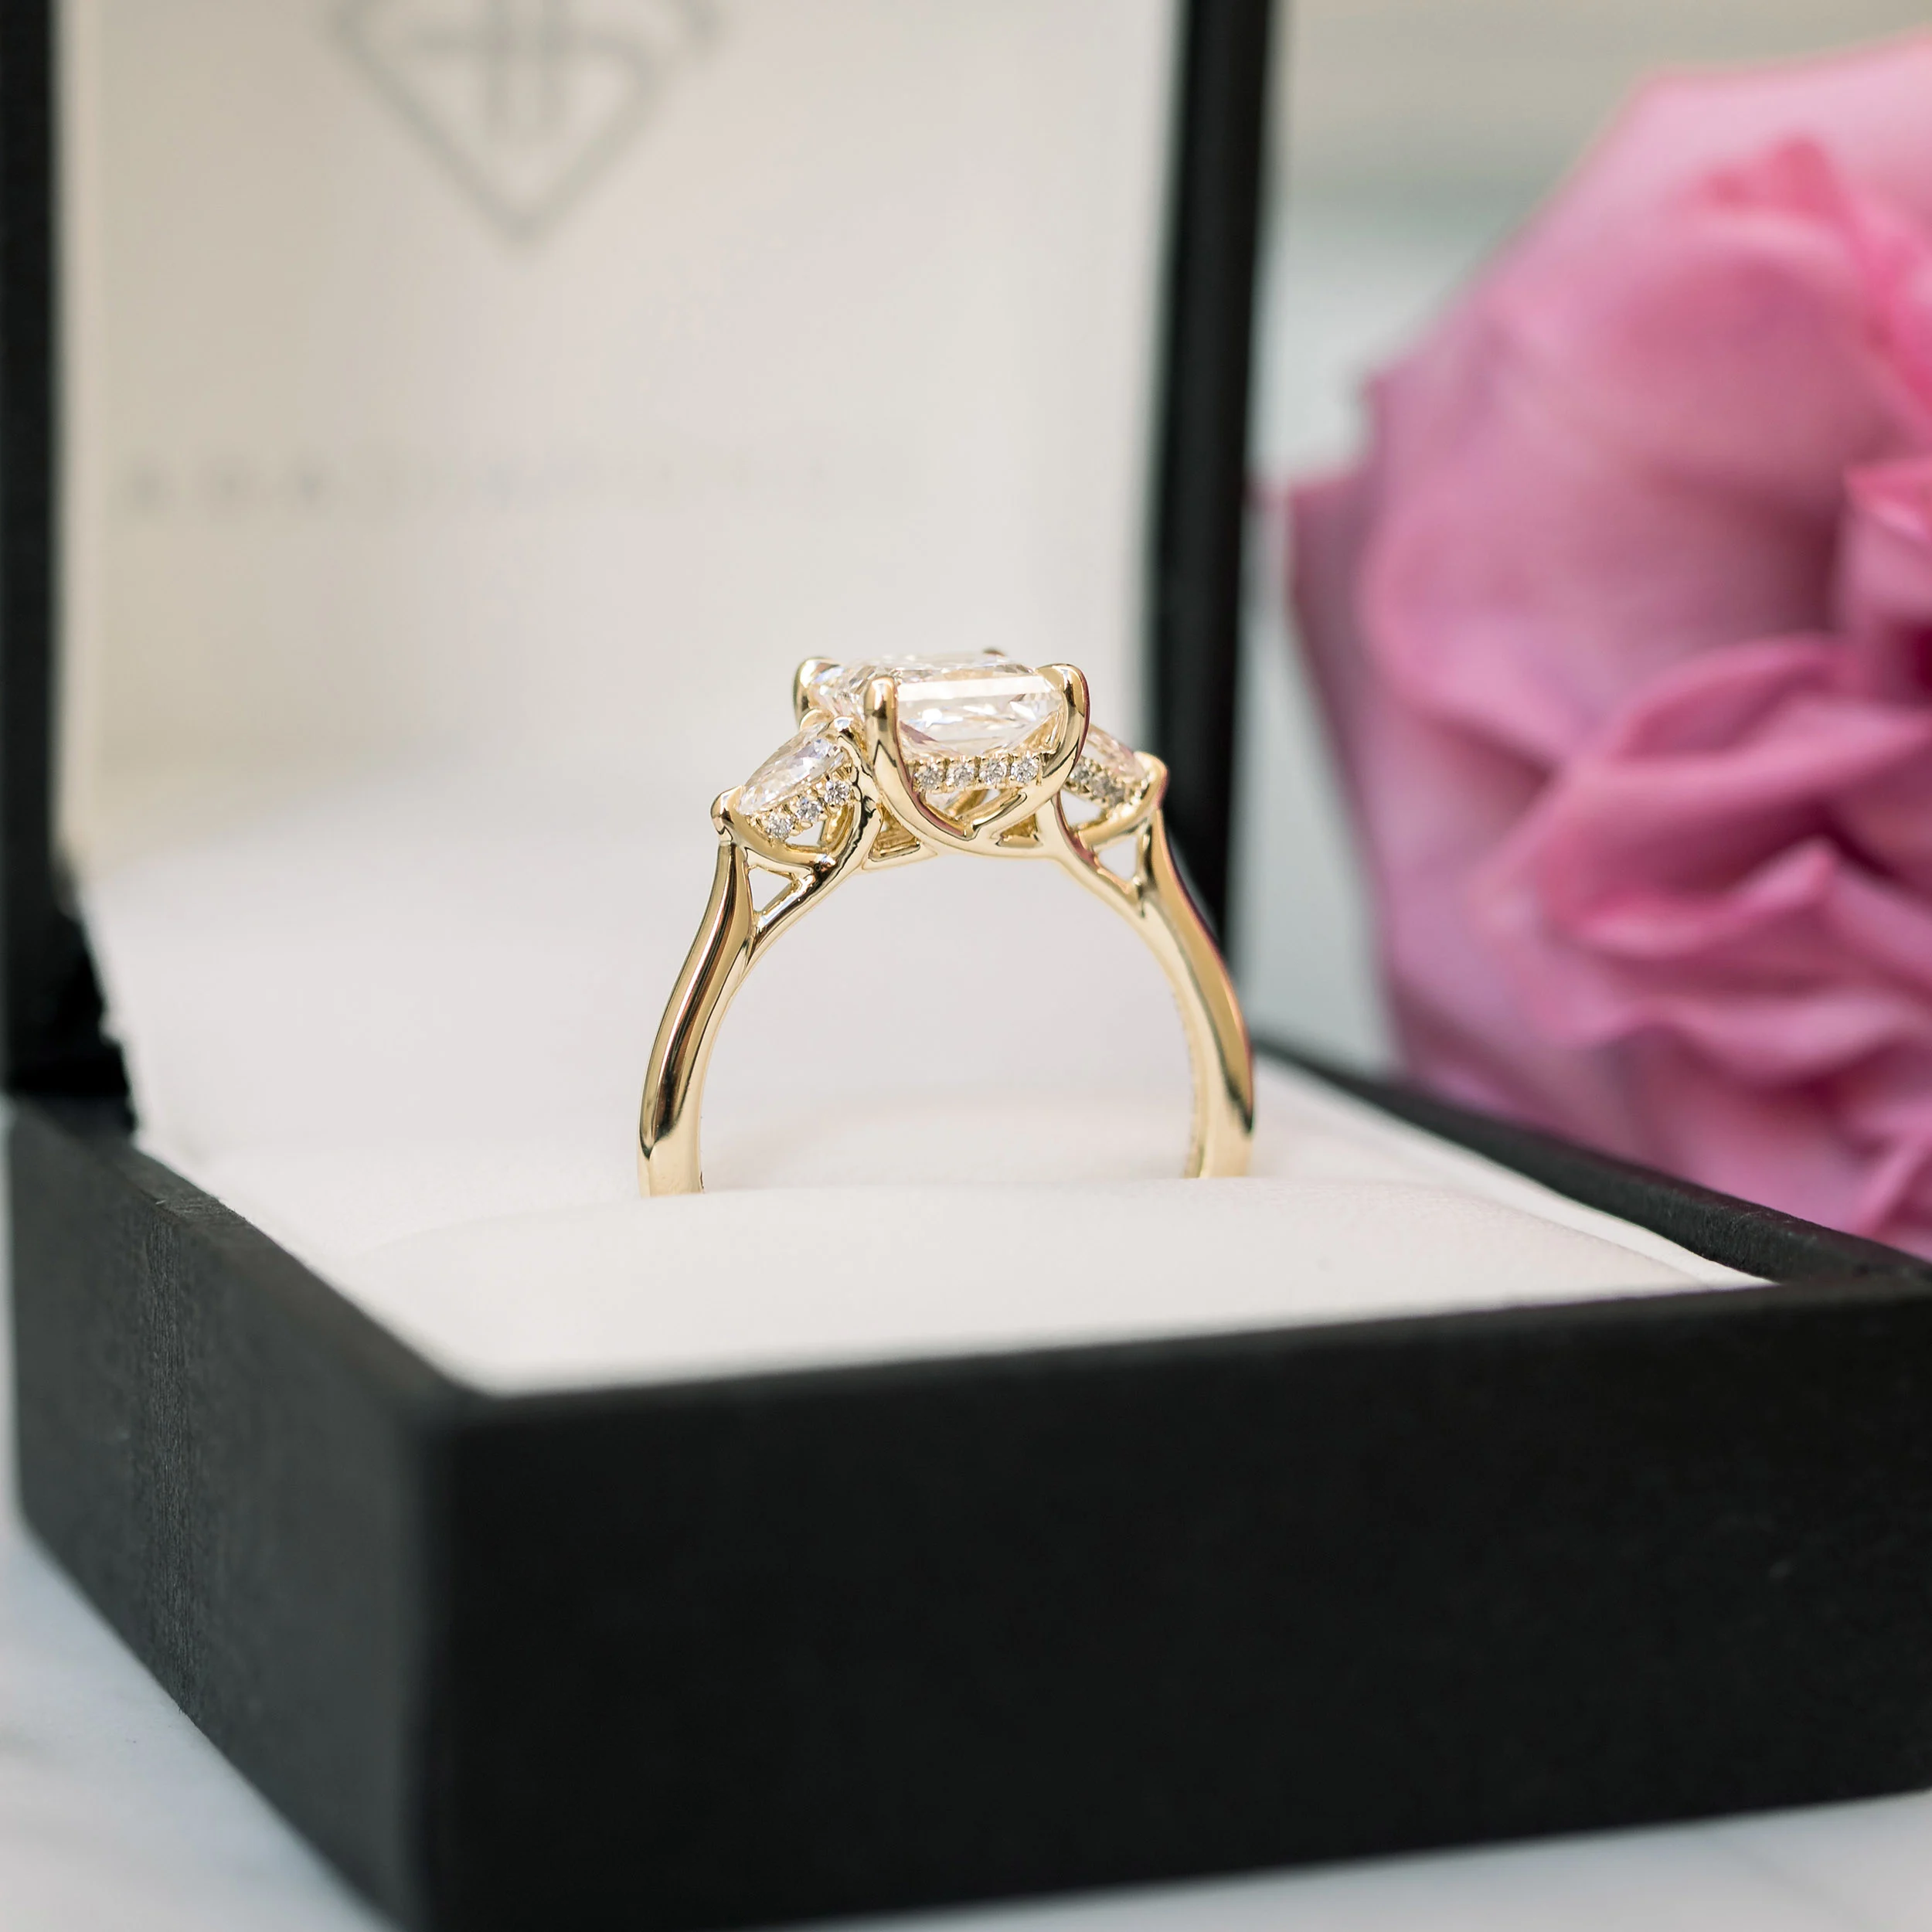 Yellow Gold Princess and Pear Setting featuring 1.75 Carat Lab Diamonds (Profile View)